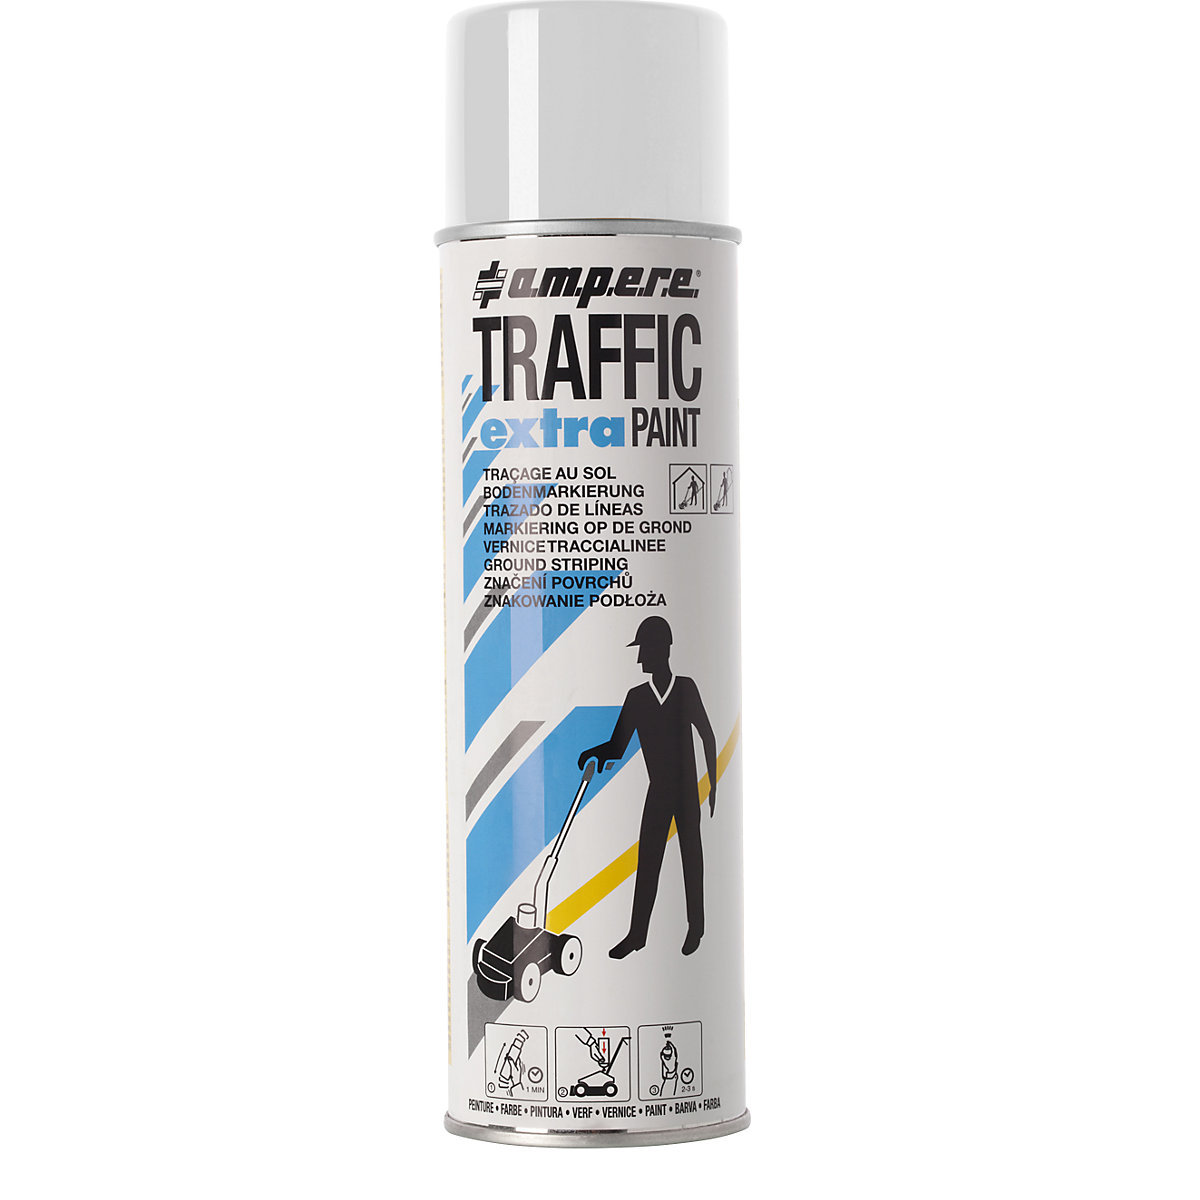 Traffic extra Paint® marking paint for demanding applications – Ampere